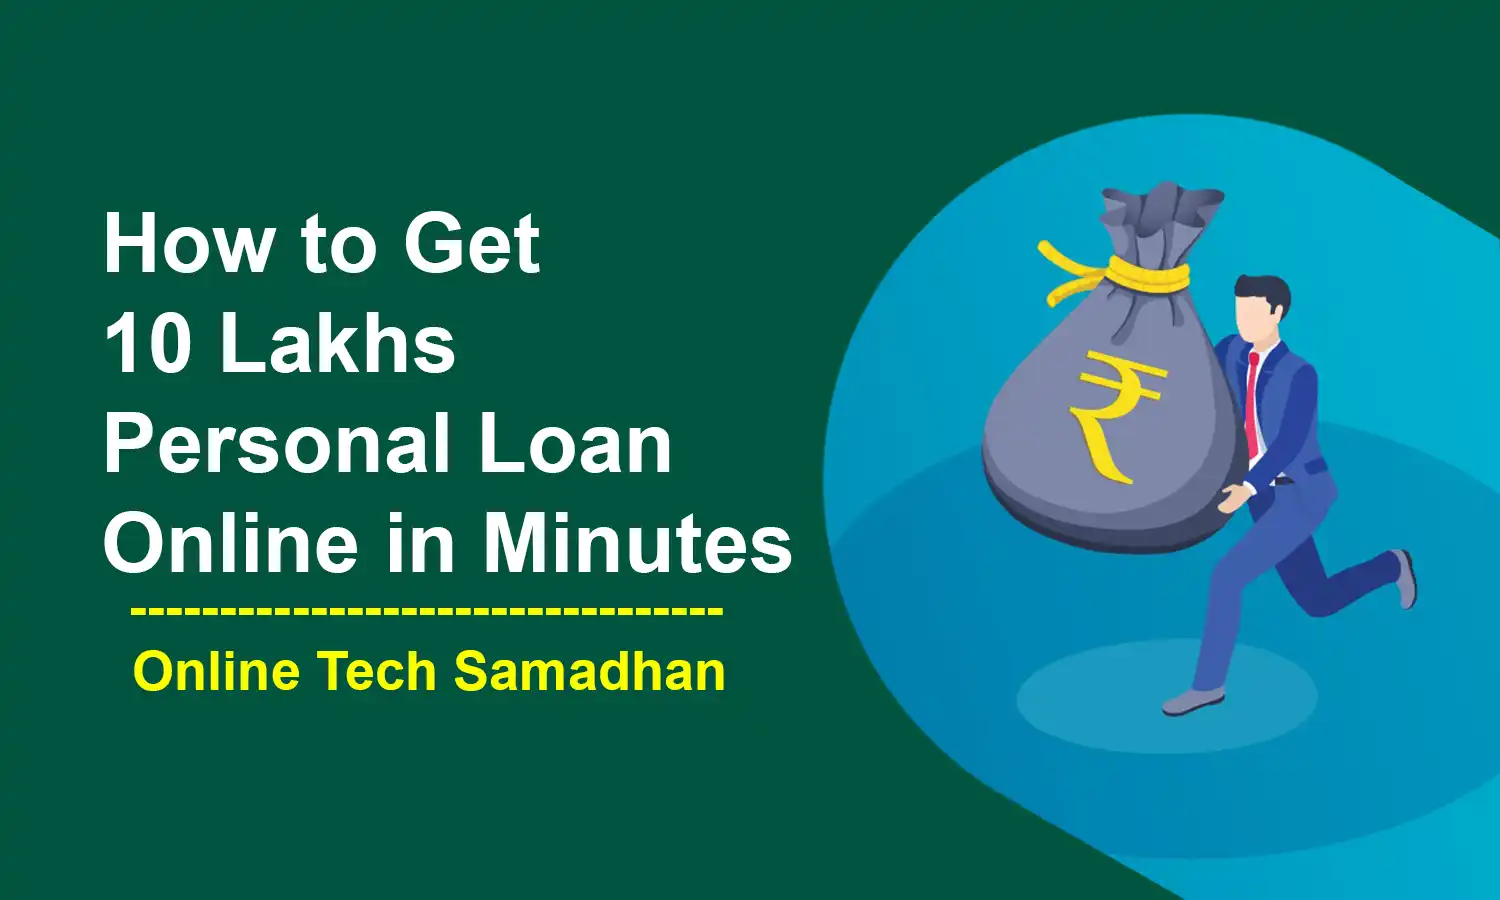 How to Get 10 Lakhs Personal Loan Online in Minutes